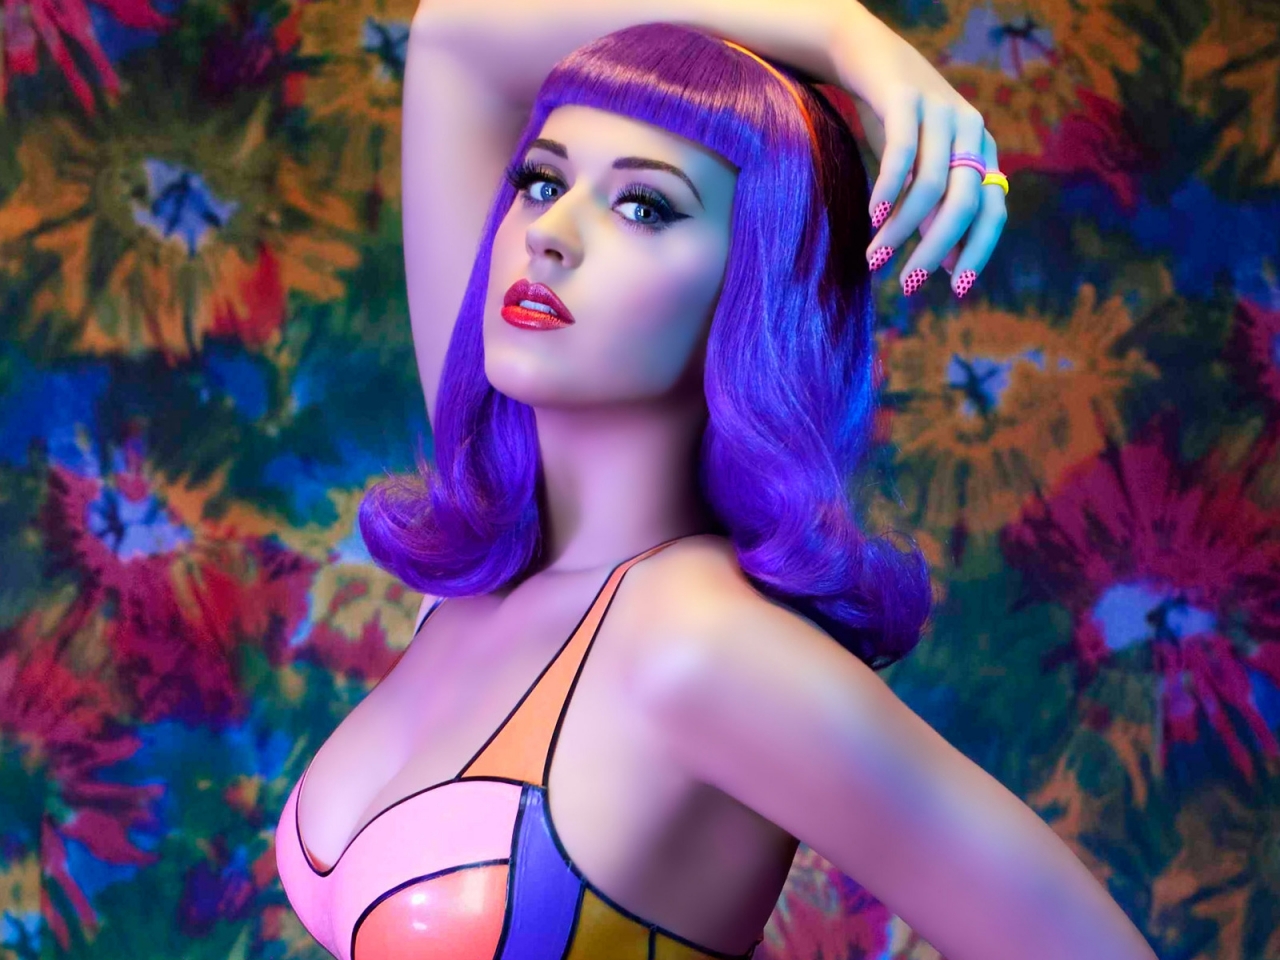 Colourful Katy Perry for 1280 x 960 resolution